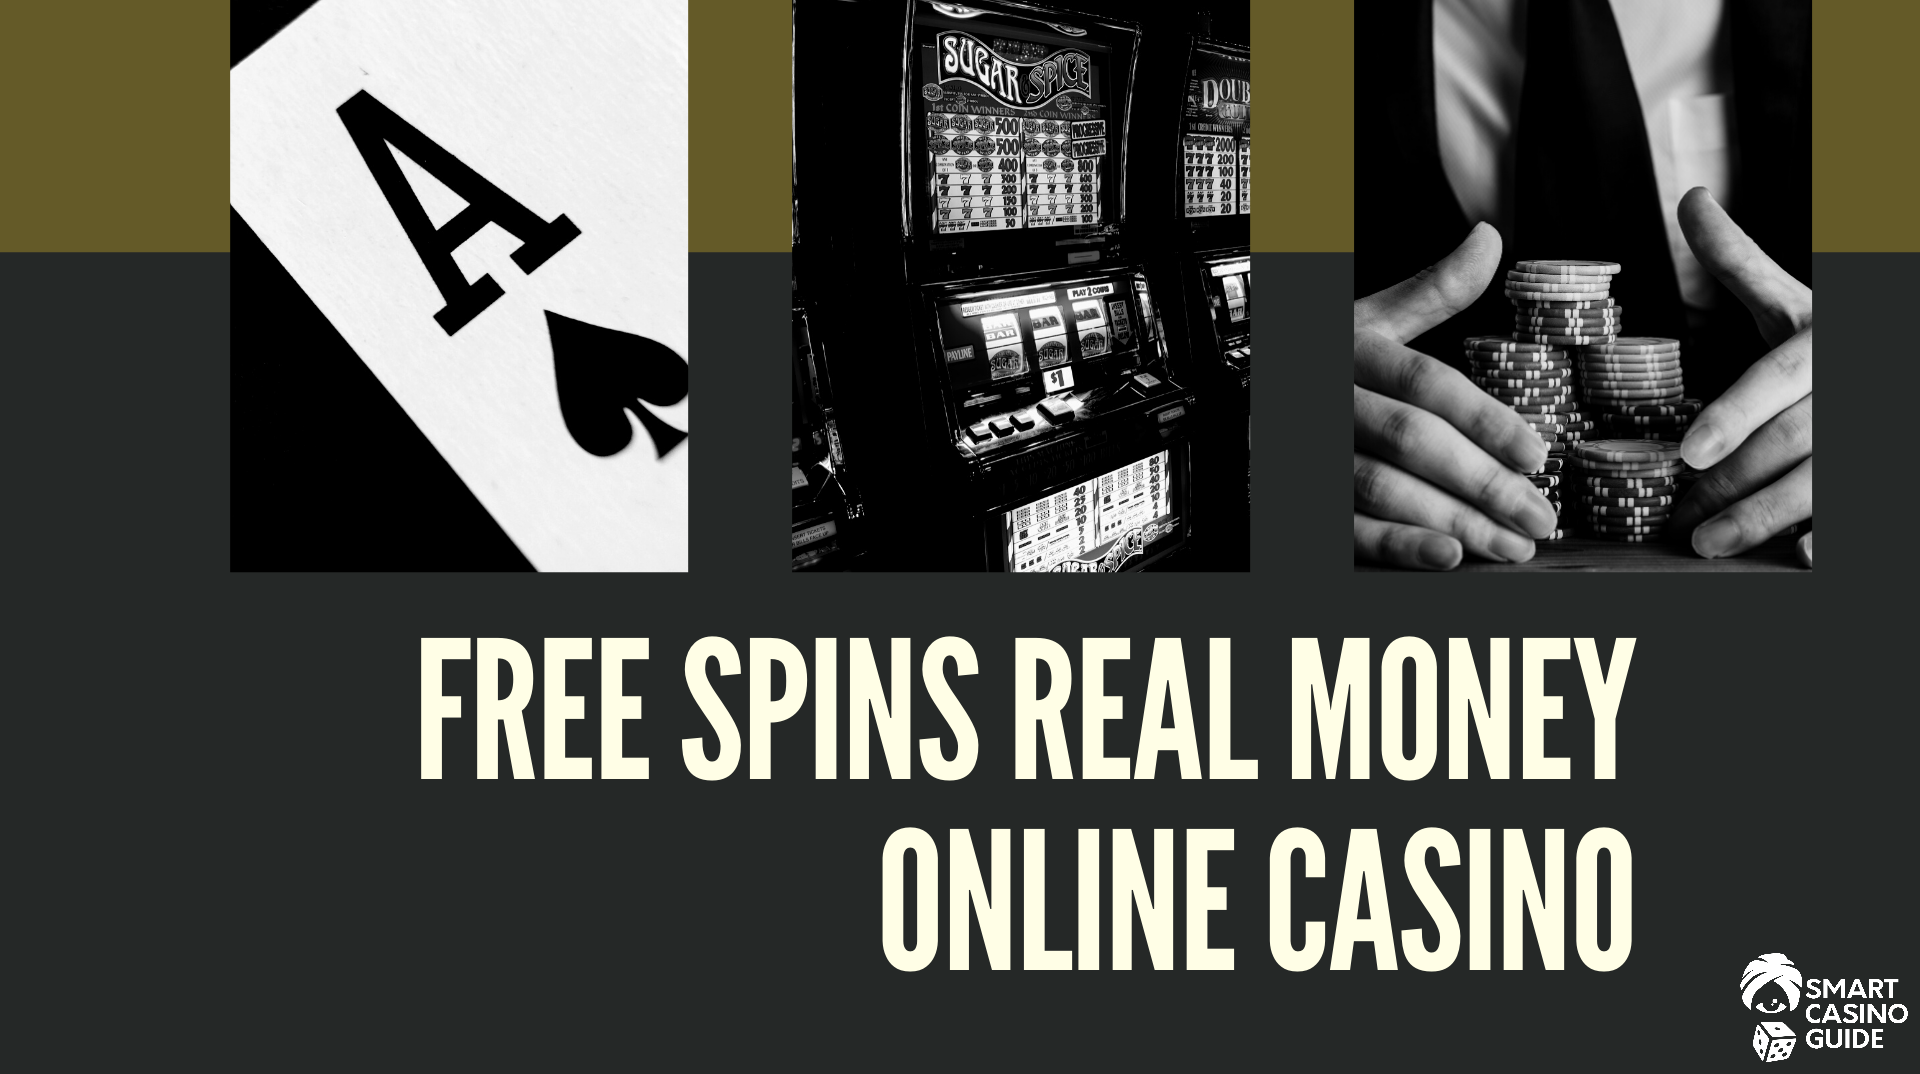 10 Effective Ways To Get More Out Of best online casino nz